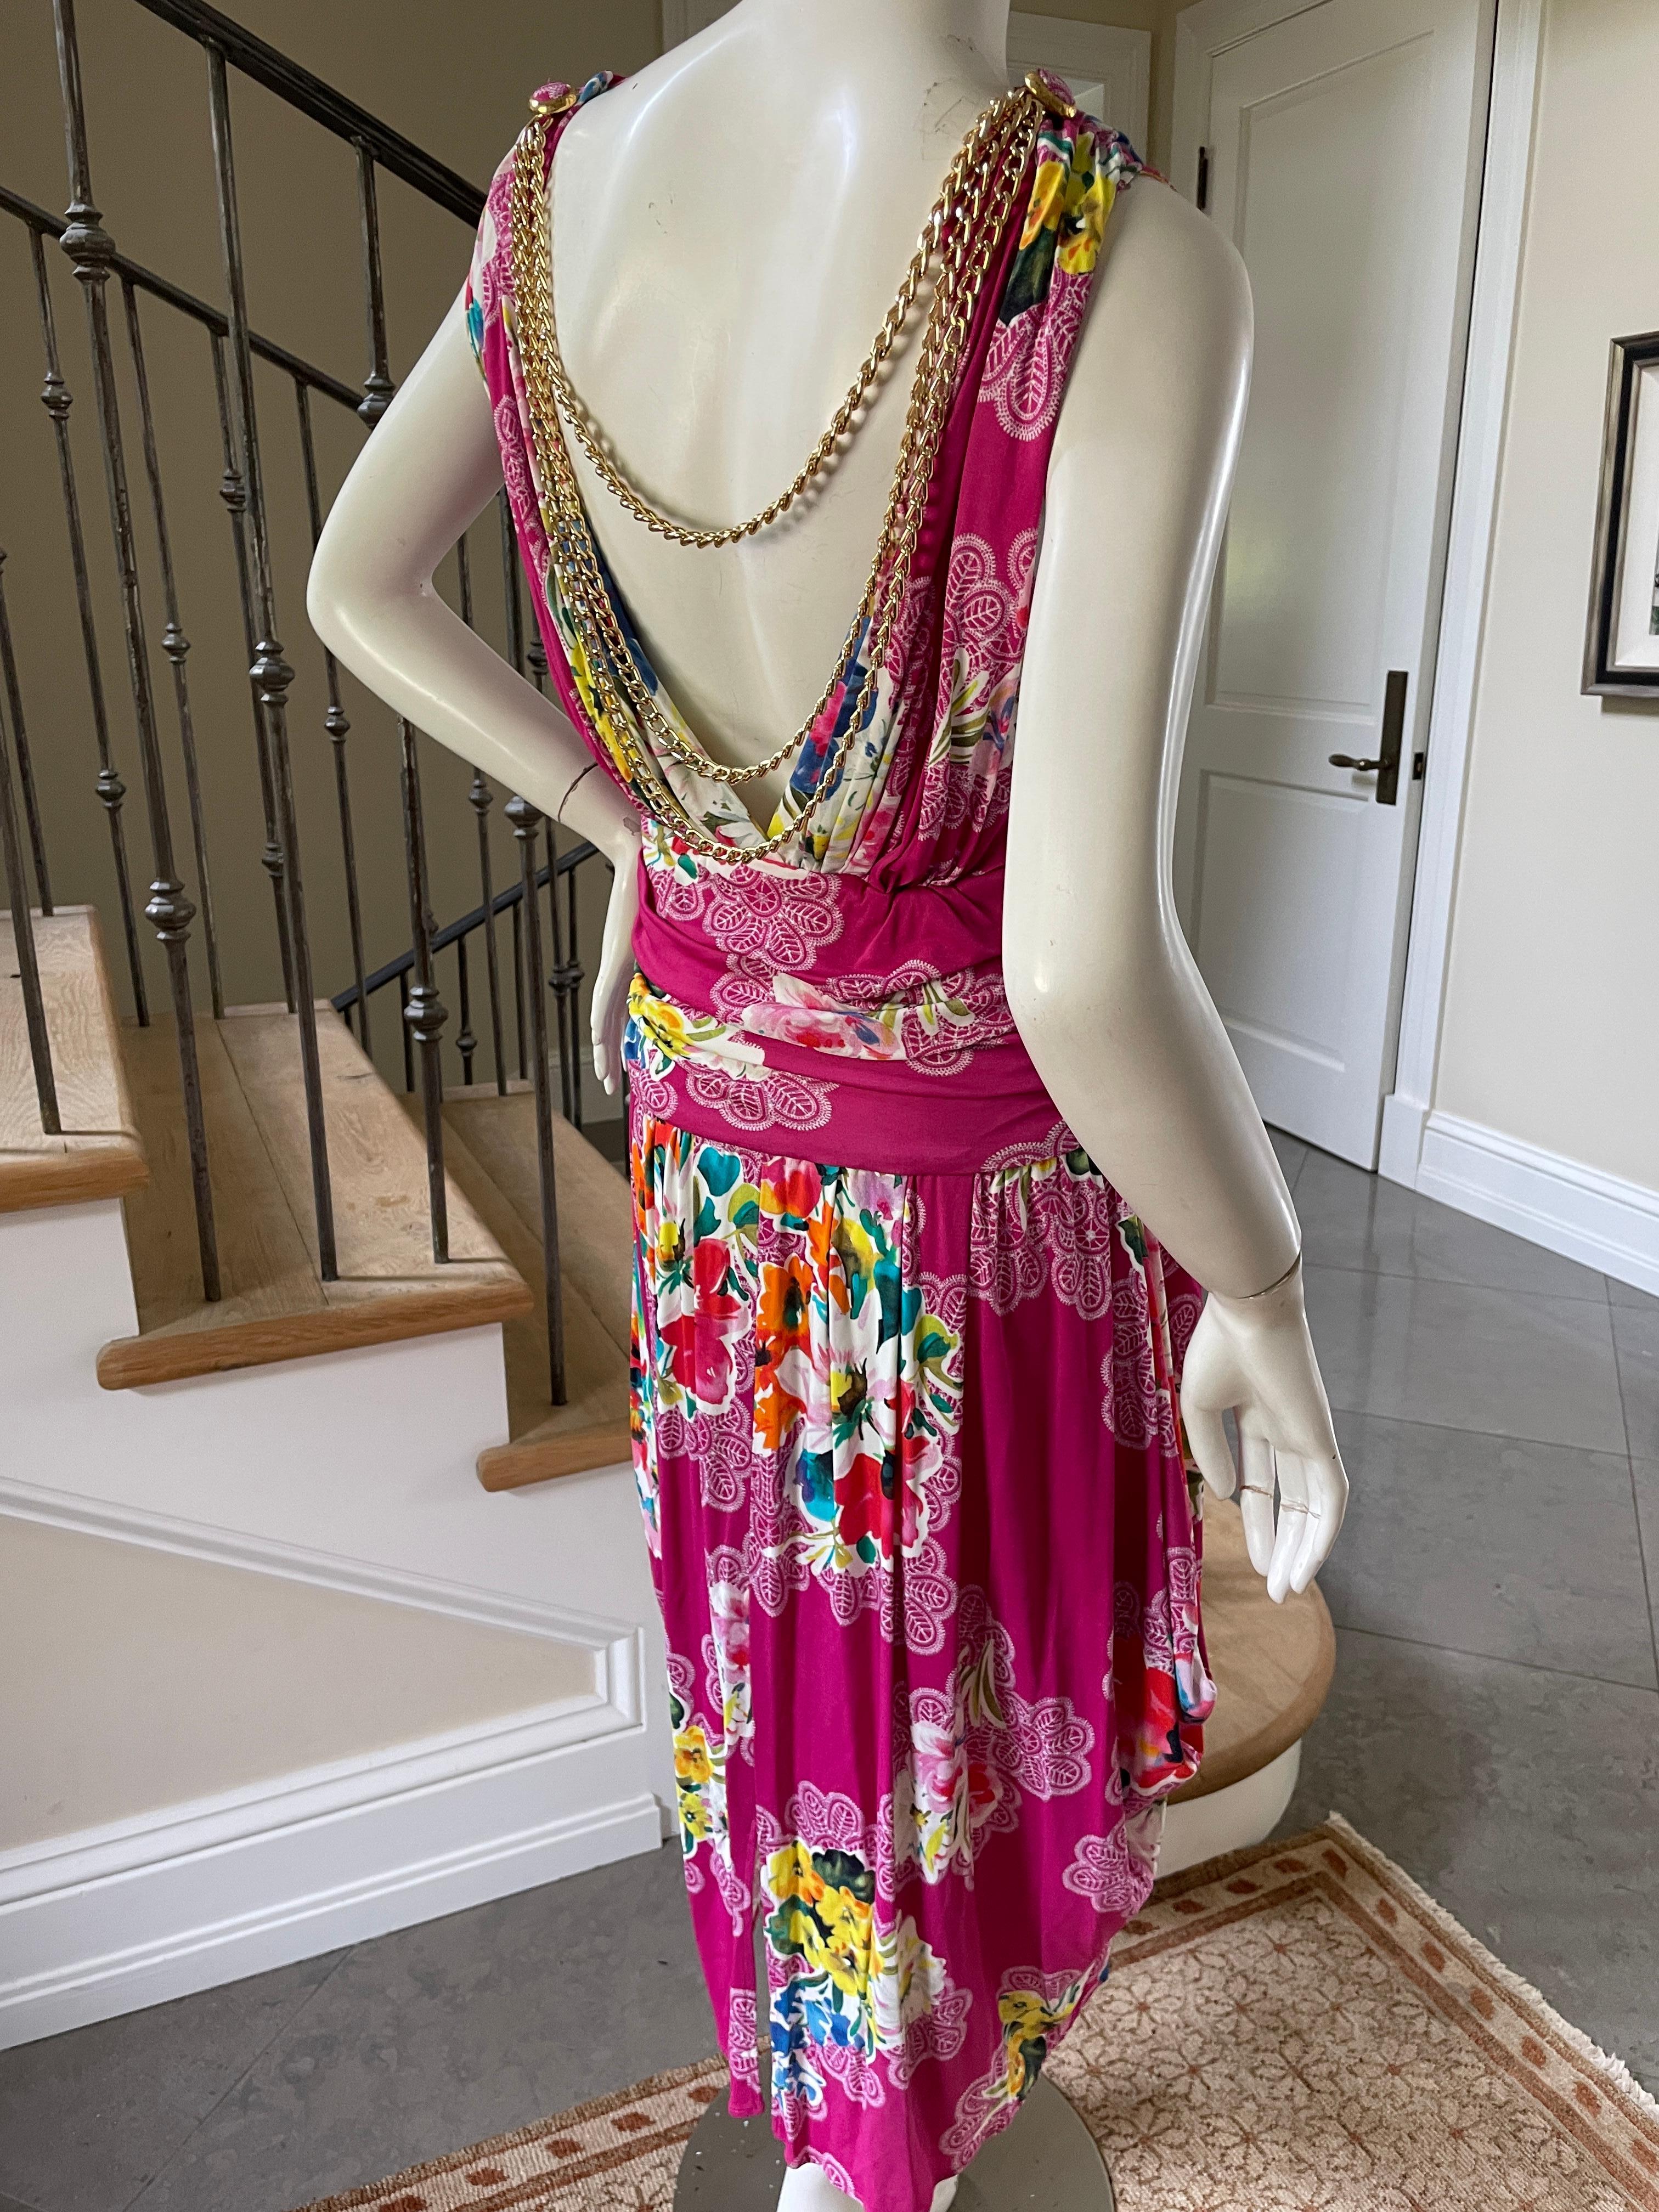 Dolce & Gabbana for D&G Vintage Floral Dress with Draped Gold Chain Details 48 In Excellent Condition For Sale In Cloverdale, CA